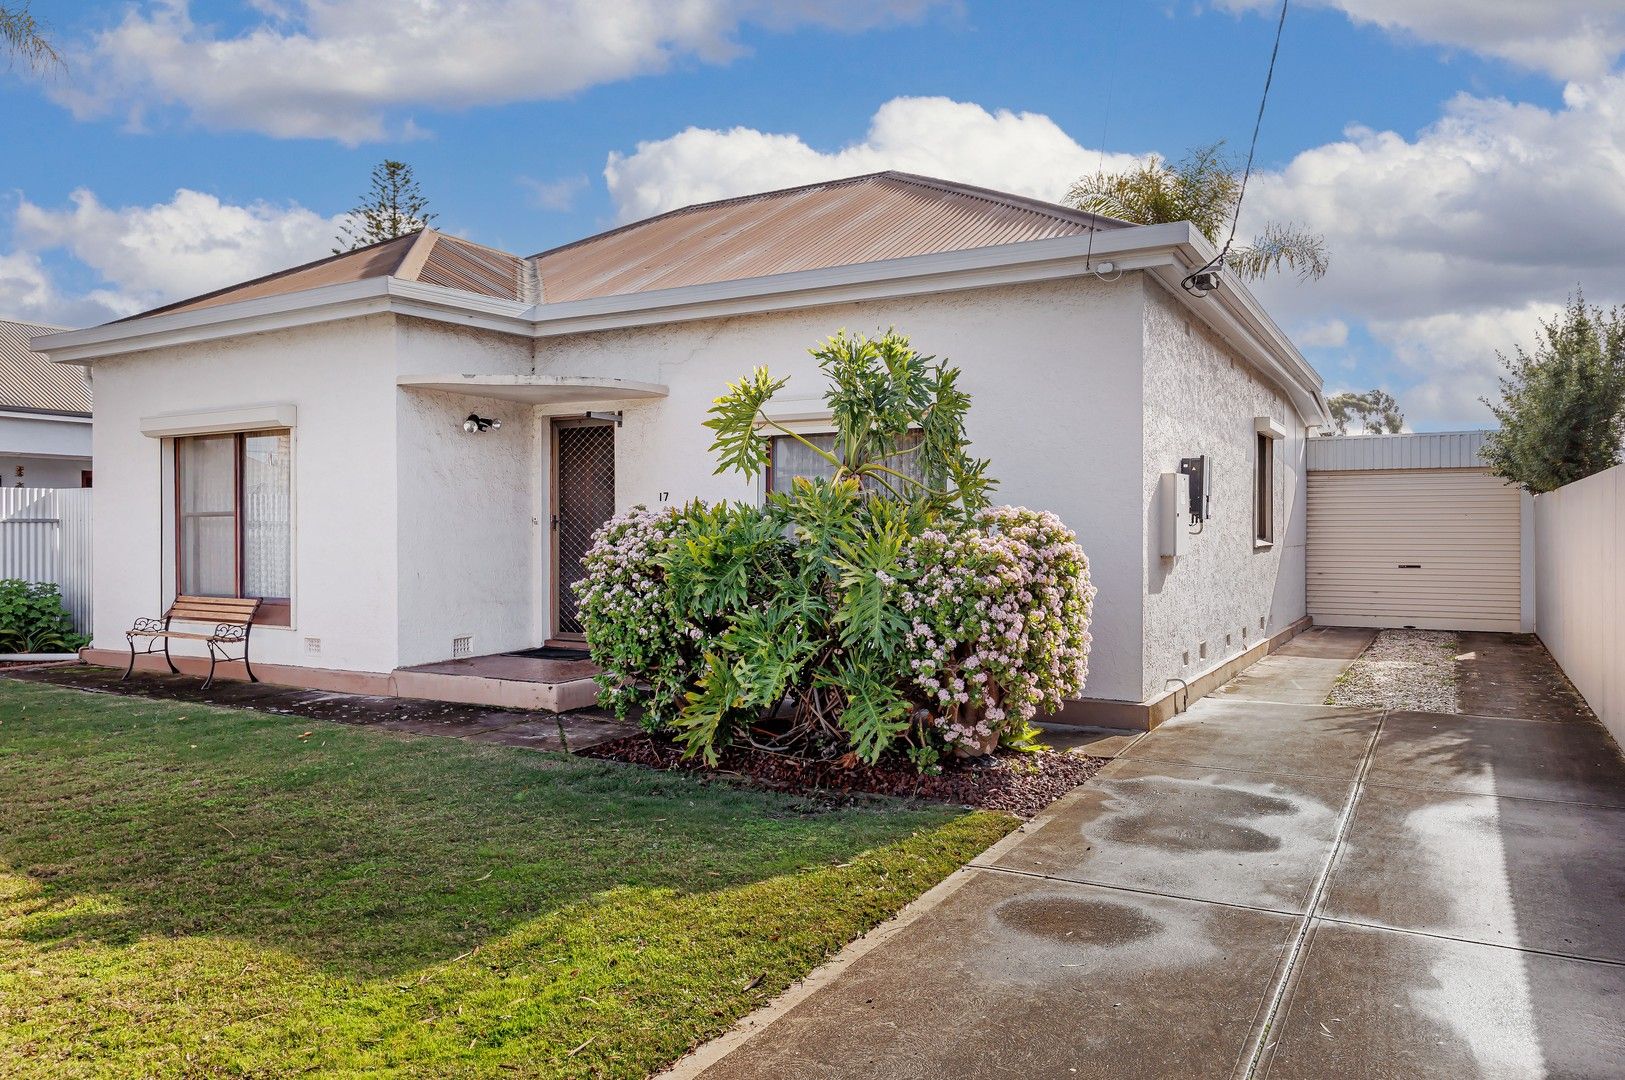 3 bedrooms House in 17 Olive Street LARGS BAY SA, 5016